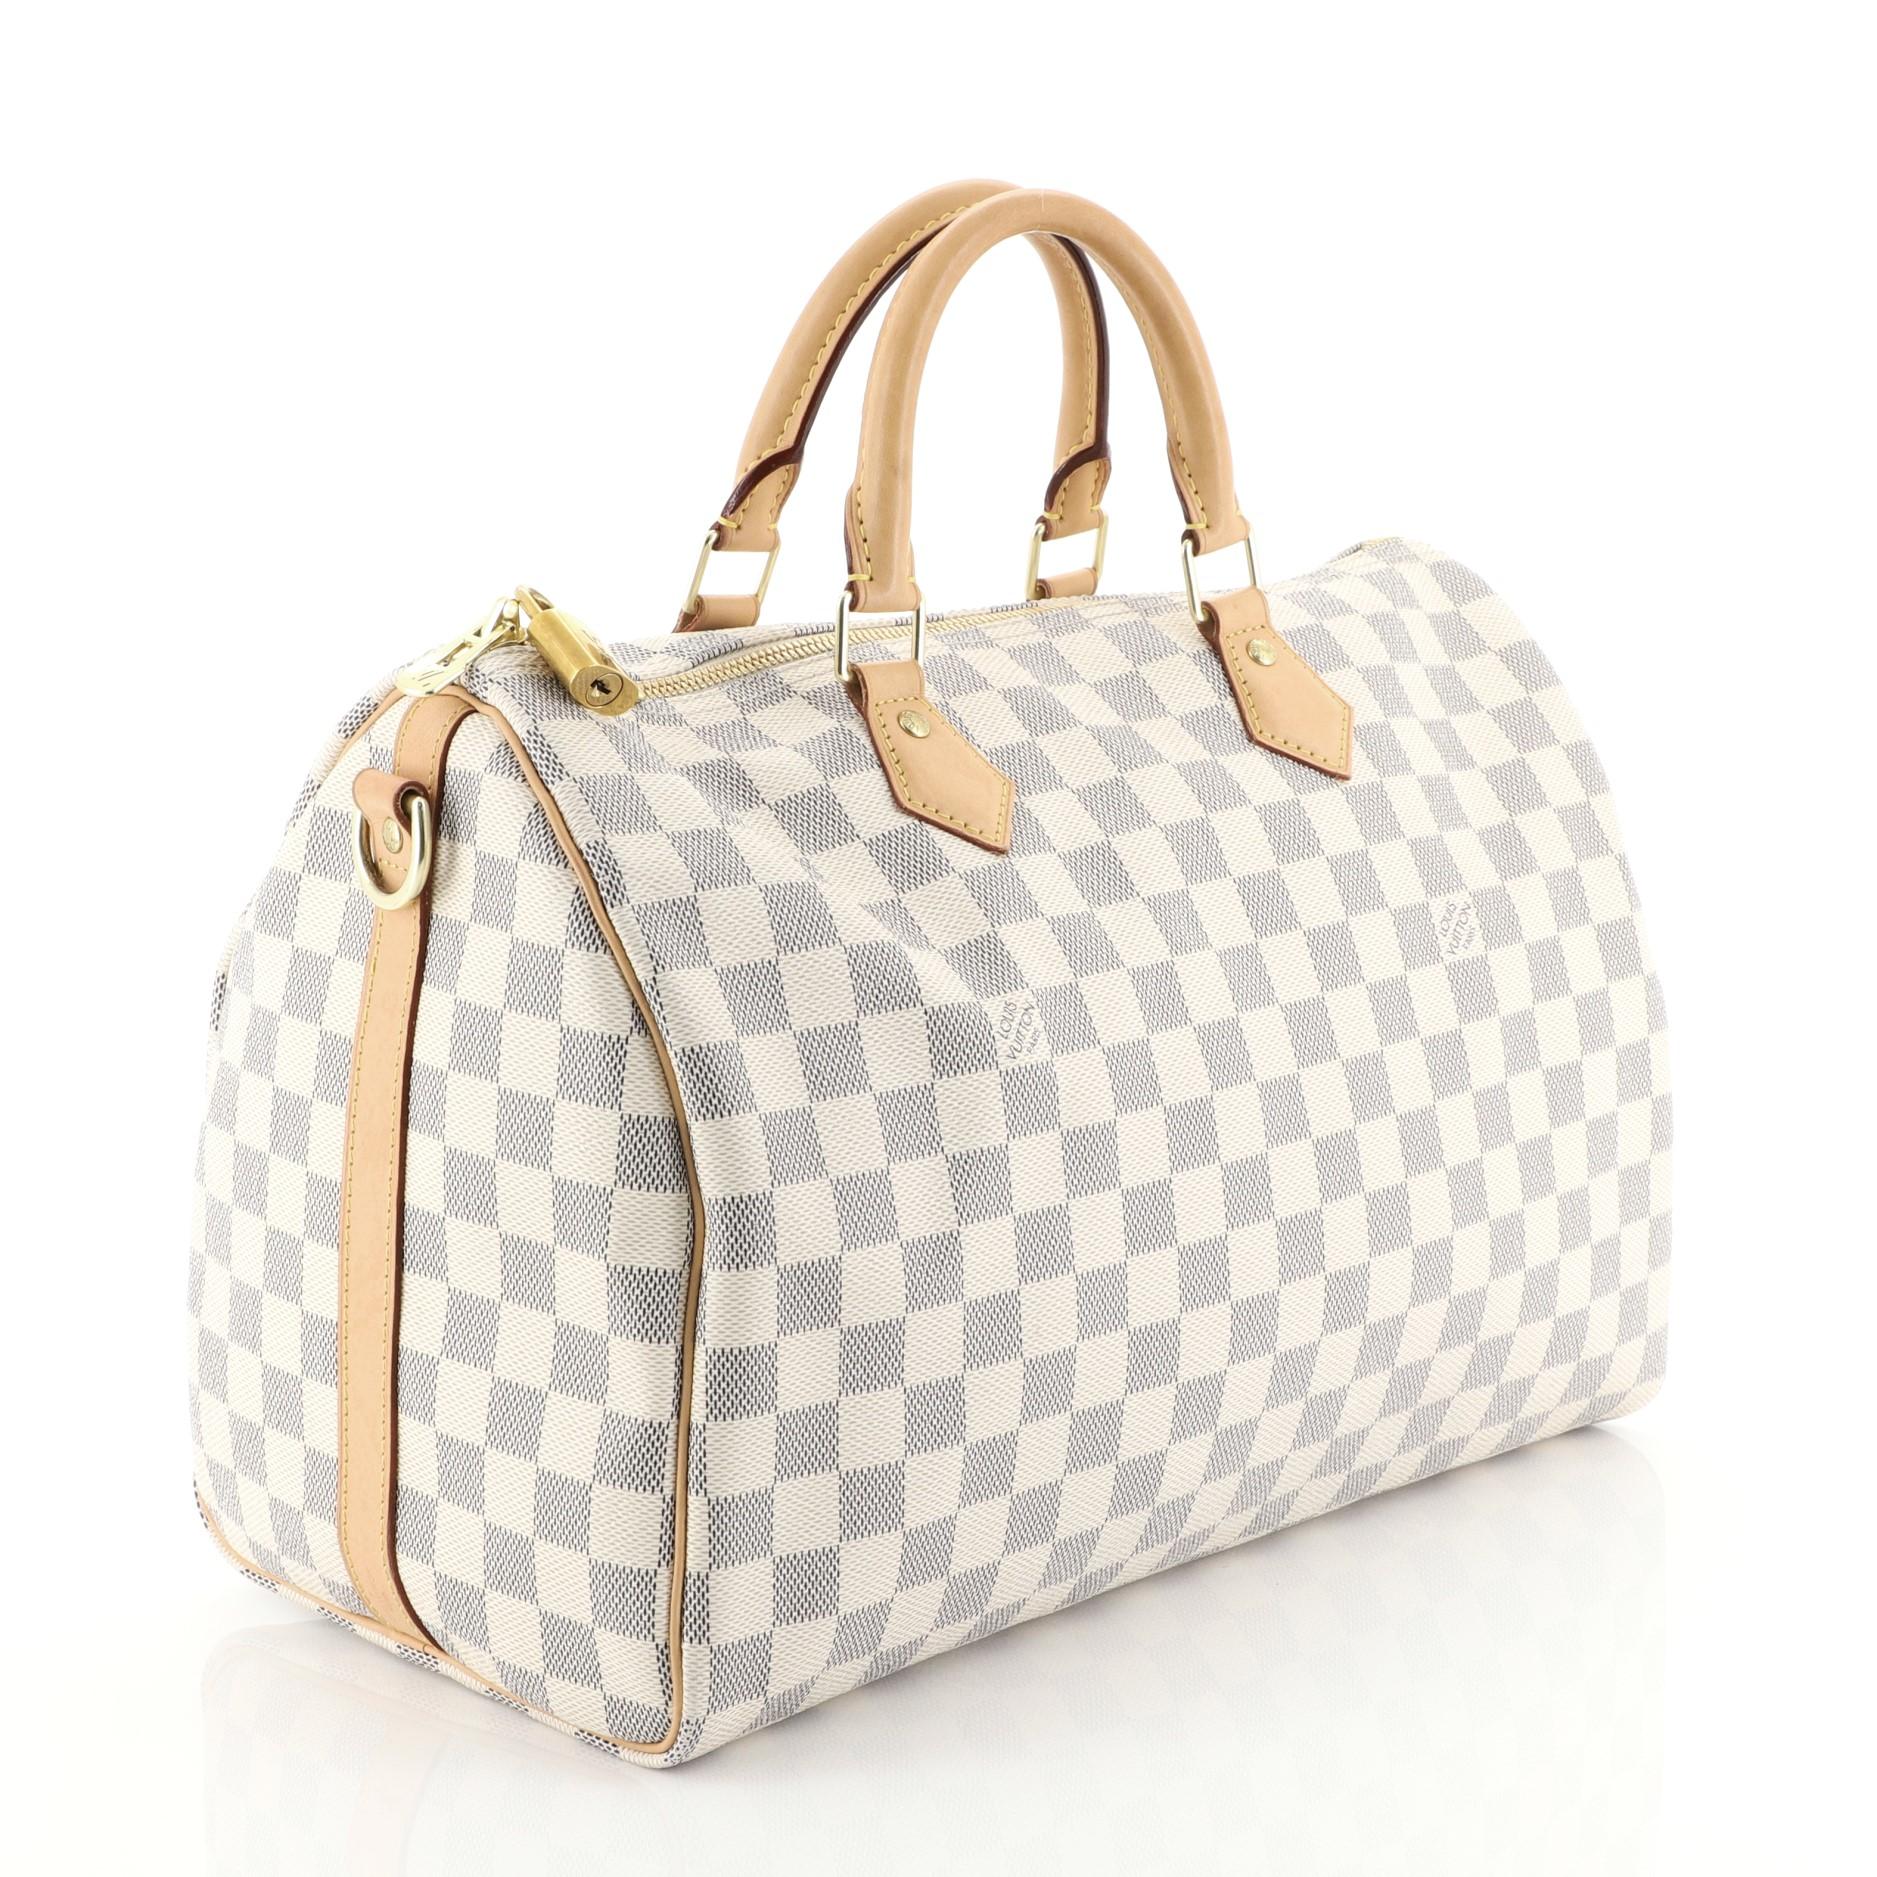 This Louis Vuitton Speedy Bandouliere Bag Damier 35, crafted from damier azur coated canvas, features dual rolled handles, leather trim and gold-tone hardware. Its two-way zip closure opens to a neutral fabric interior with slip pocket. Authenticity